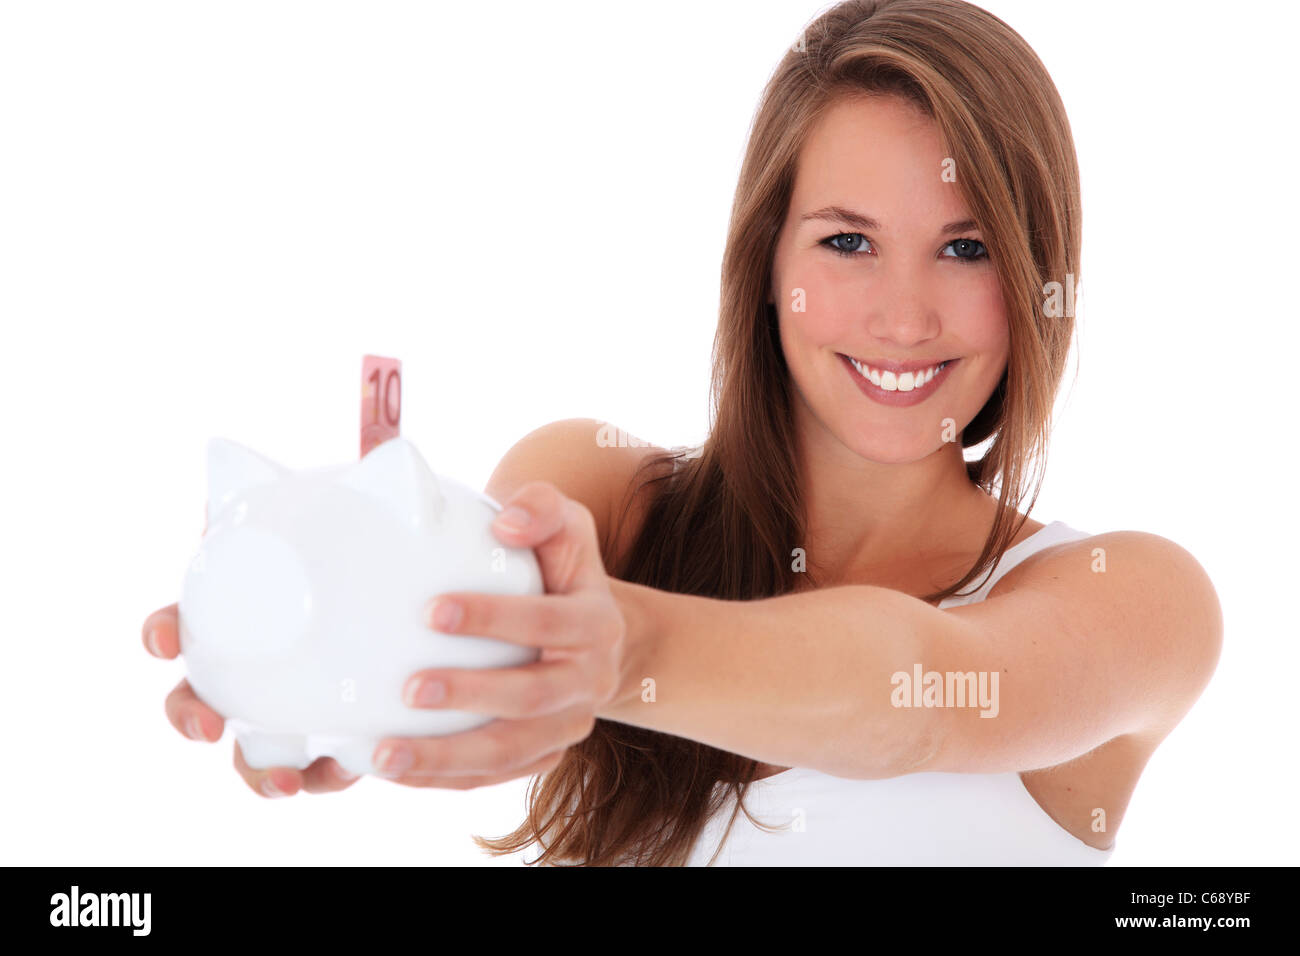 A person holding piggy bank. All on white background. Stock Photo